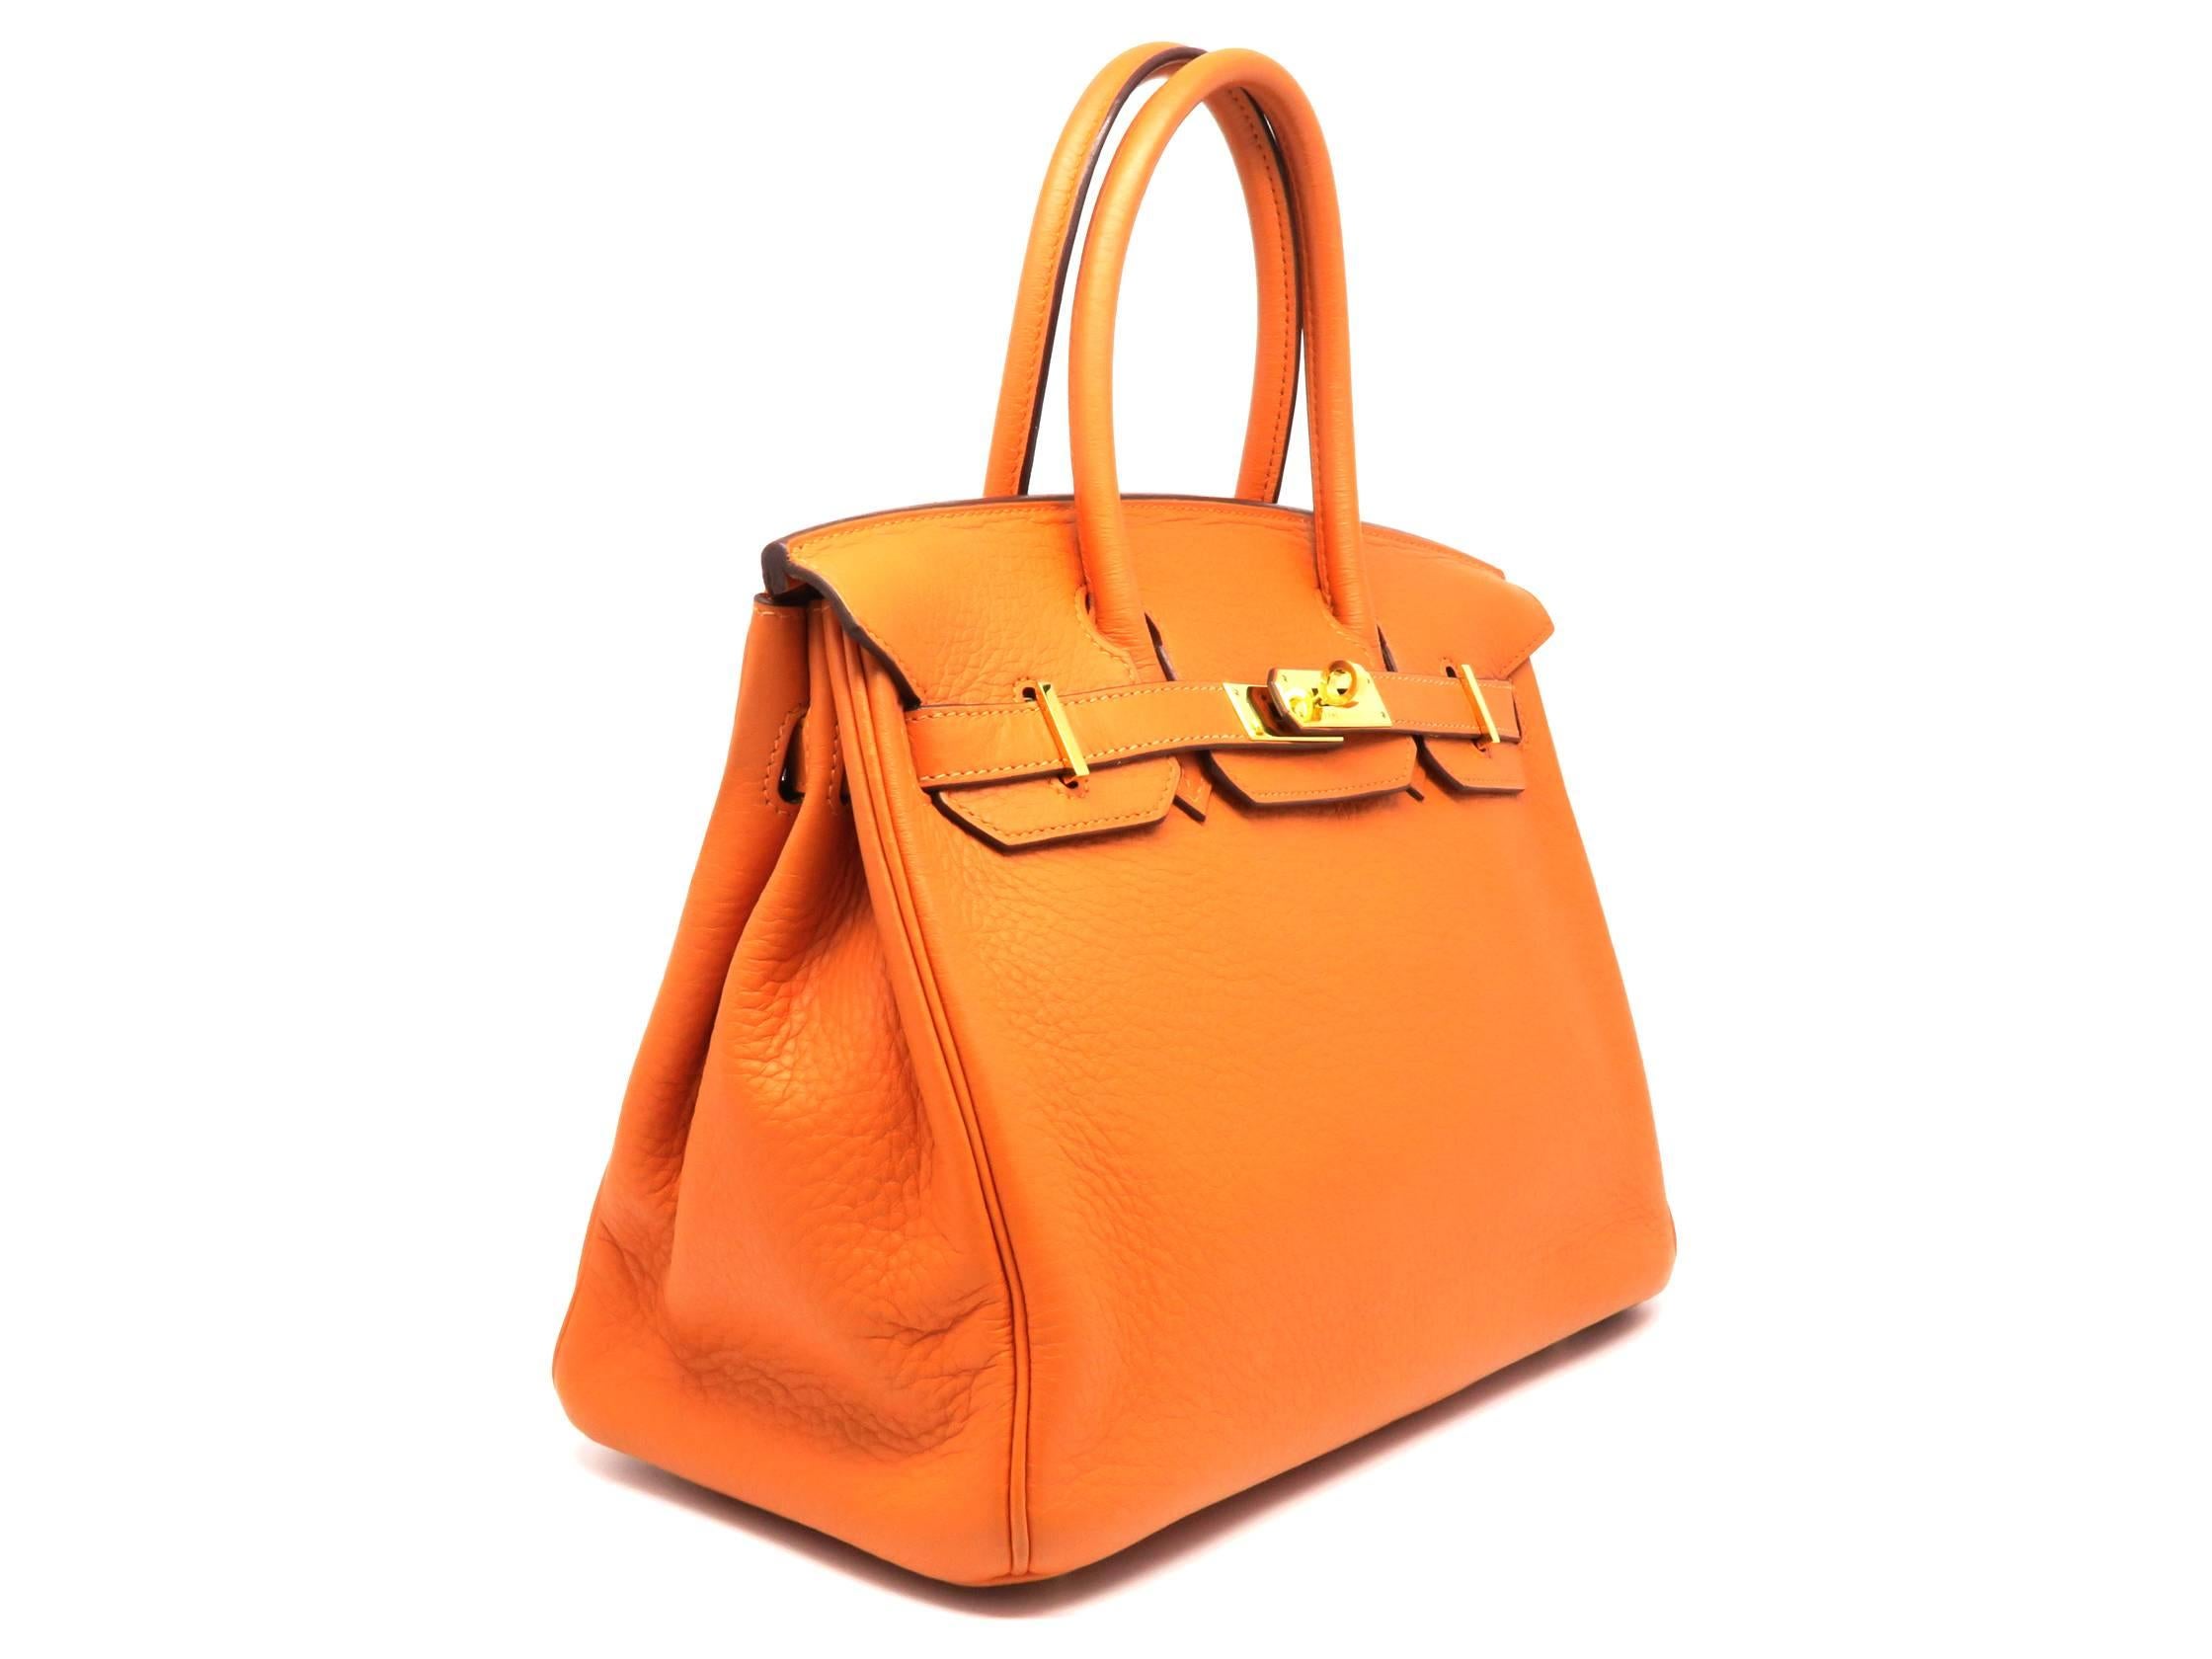 Color: Orange
Material: Taurillon Clemence Leather 

Condition:
Rank A
Overall: Good, few minor defects.
Surface: Minor Stains
Corners: Minor Scratches
Edges: Minor Scratches
Handles/Straps: Minor Scratches
Hardware: Minor Scratches
Other: Minor